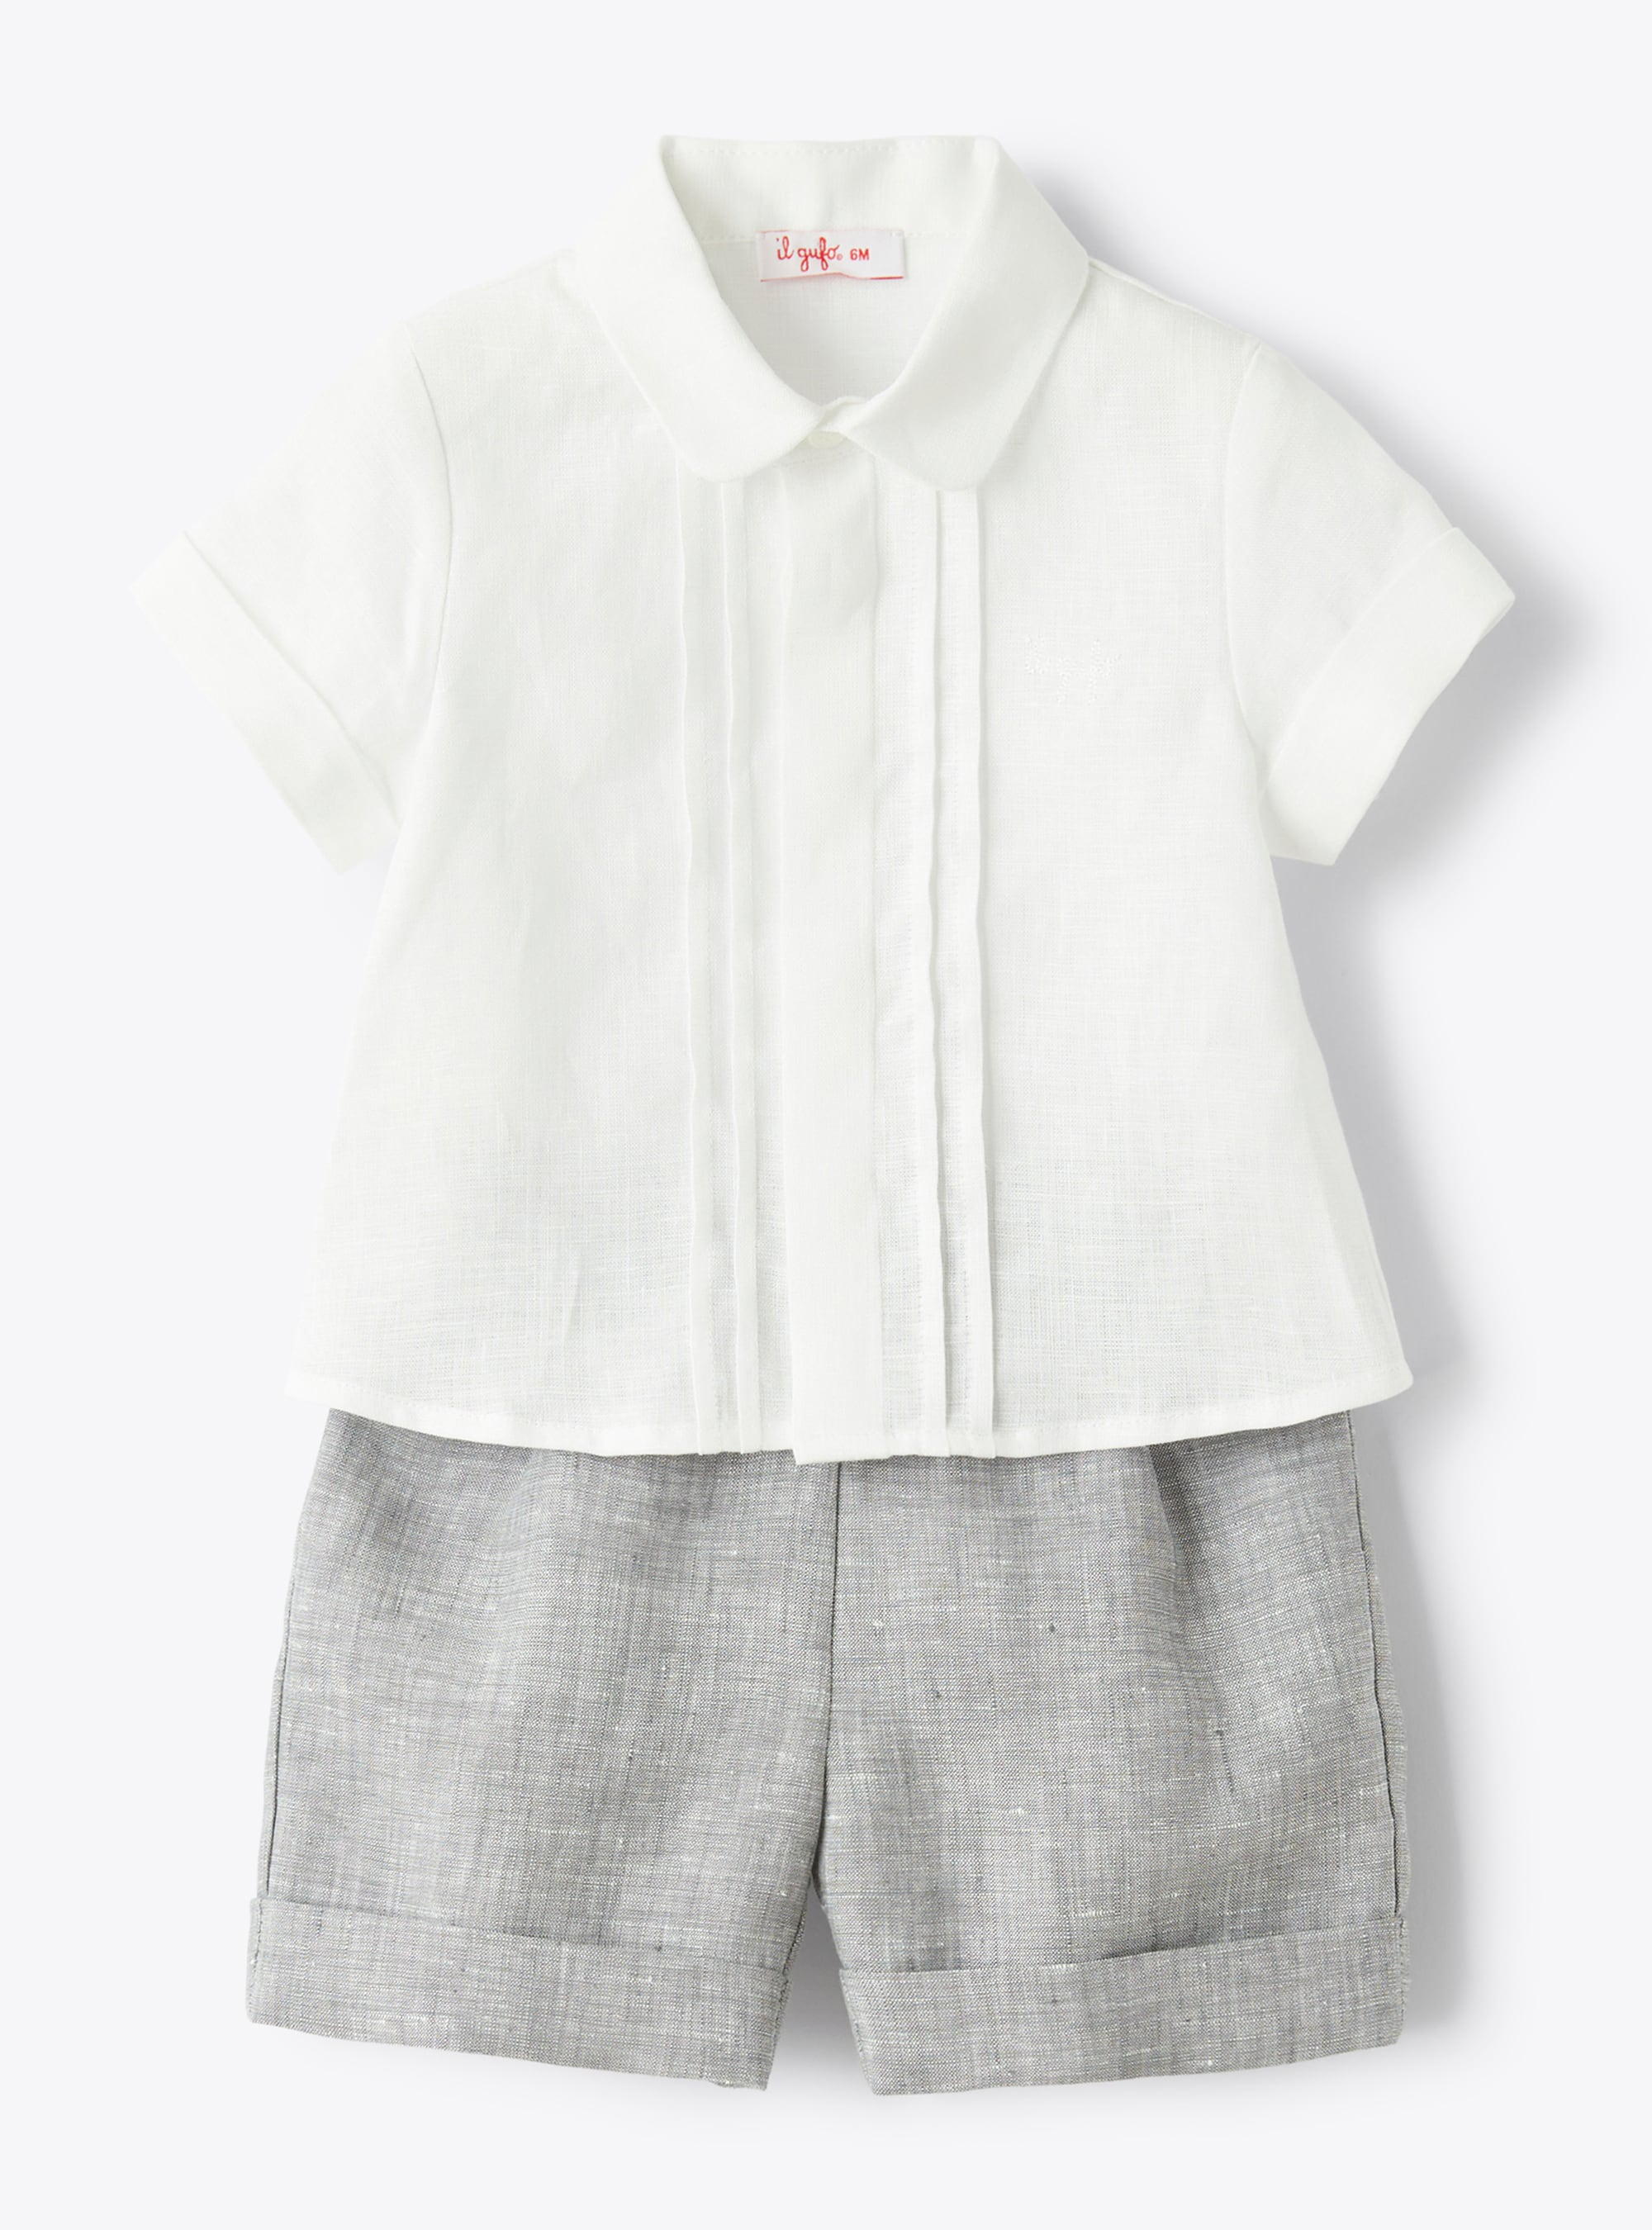 Two-piece set in linen for baby boys - COMPLETO DUE PEZZI - Il Gufo